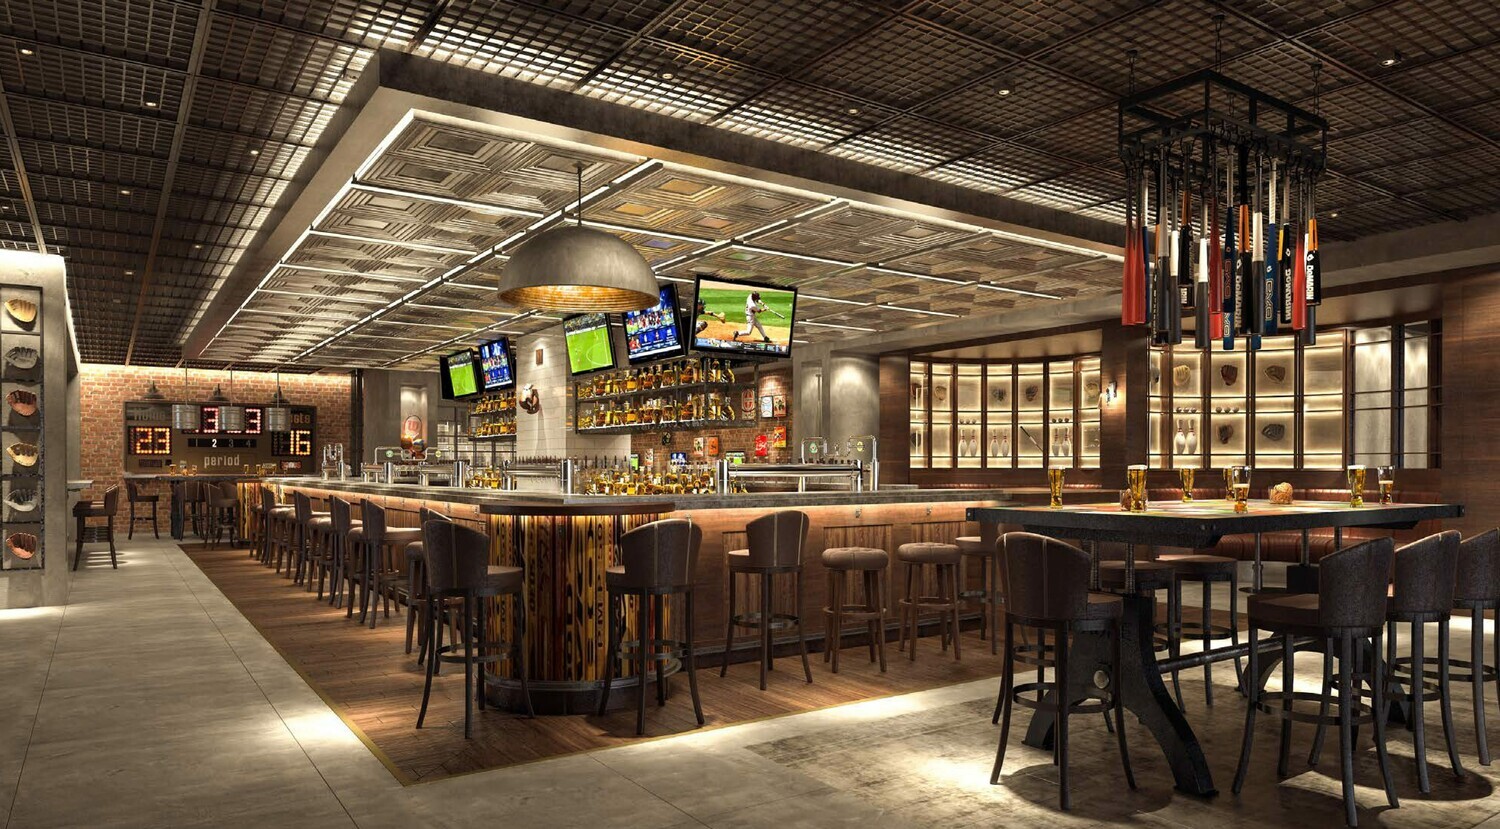 Finding the Best Sports Bars in Doha just got Easier with the More Cravings by Marriott Bonvoy™ App